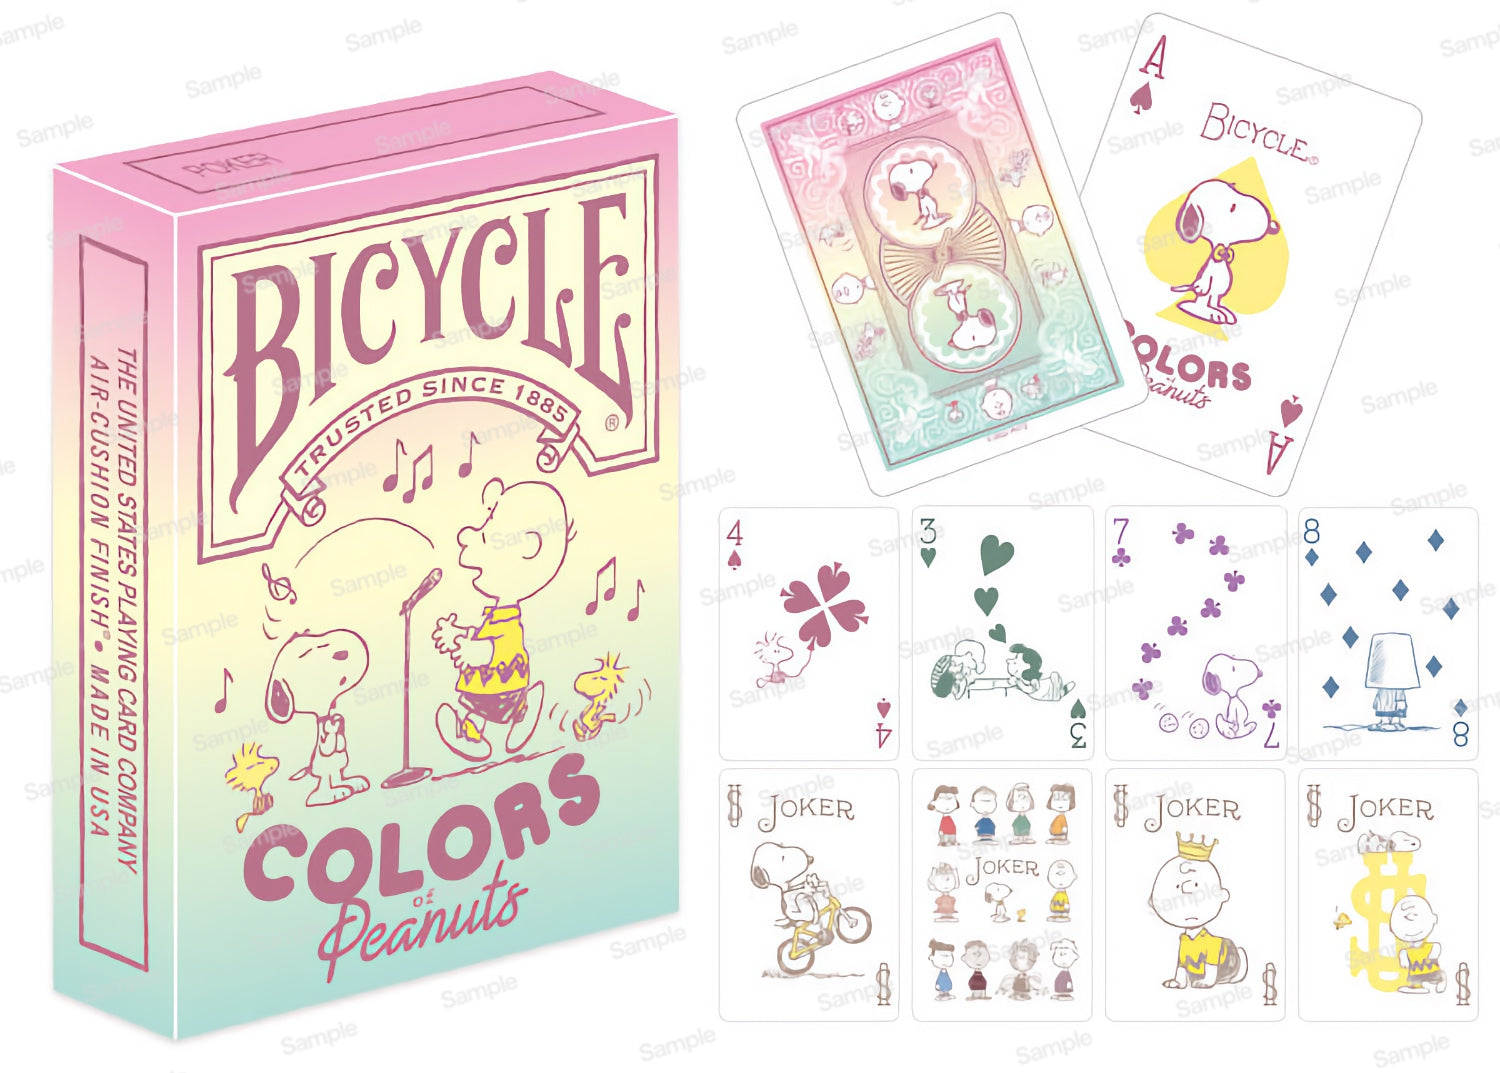 Bicycle Colors of Peanuts Snoopy Playing Cards – Cardvo